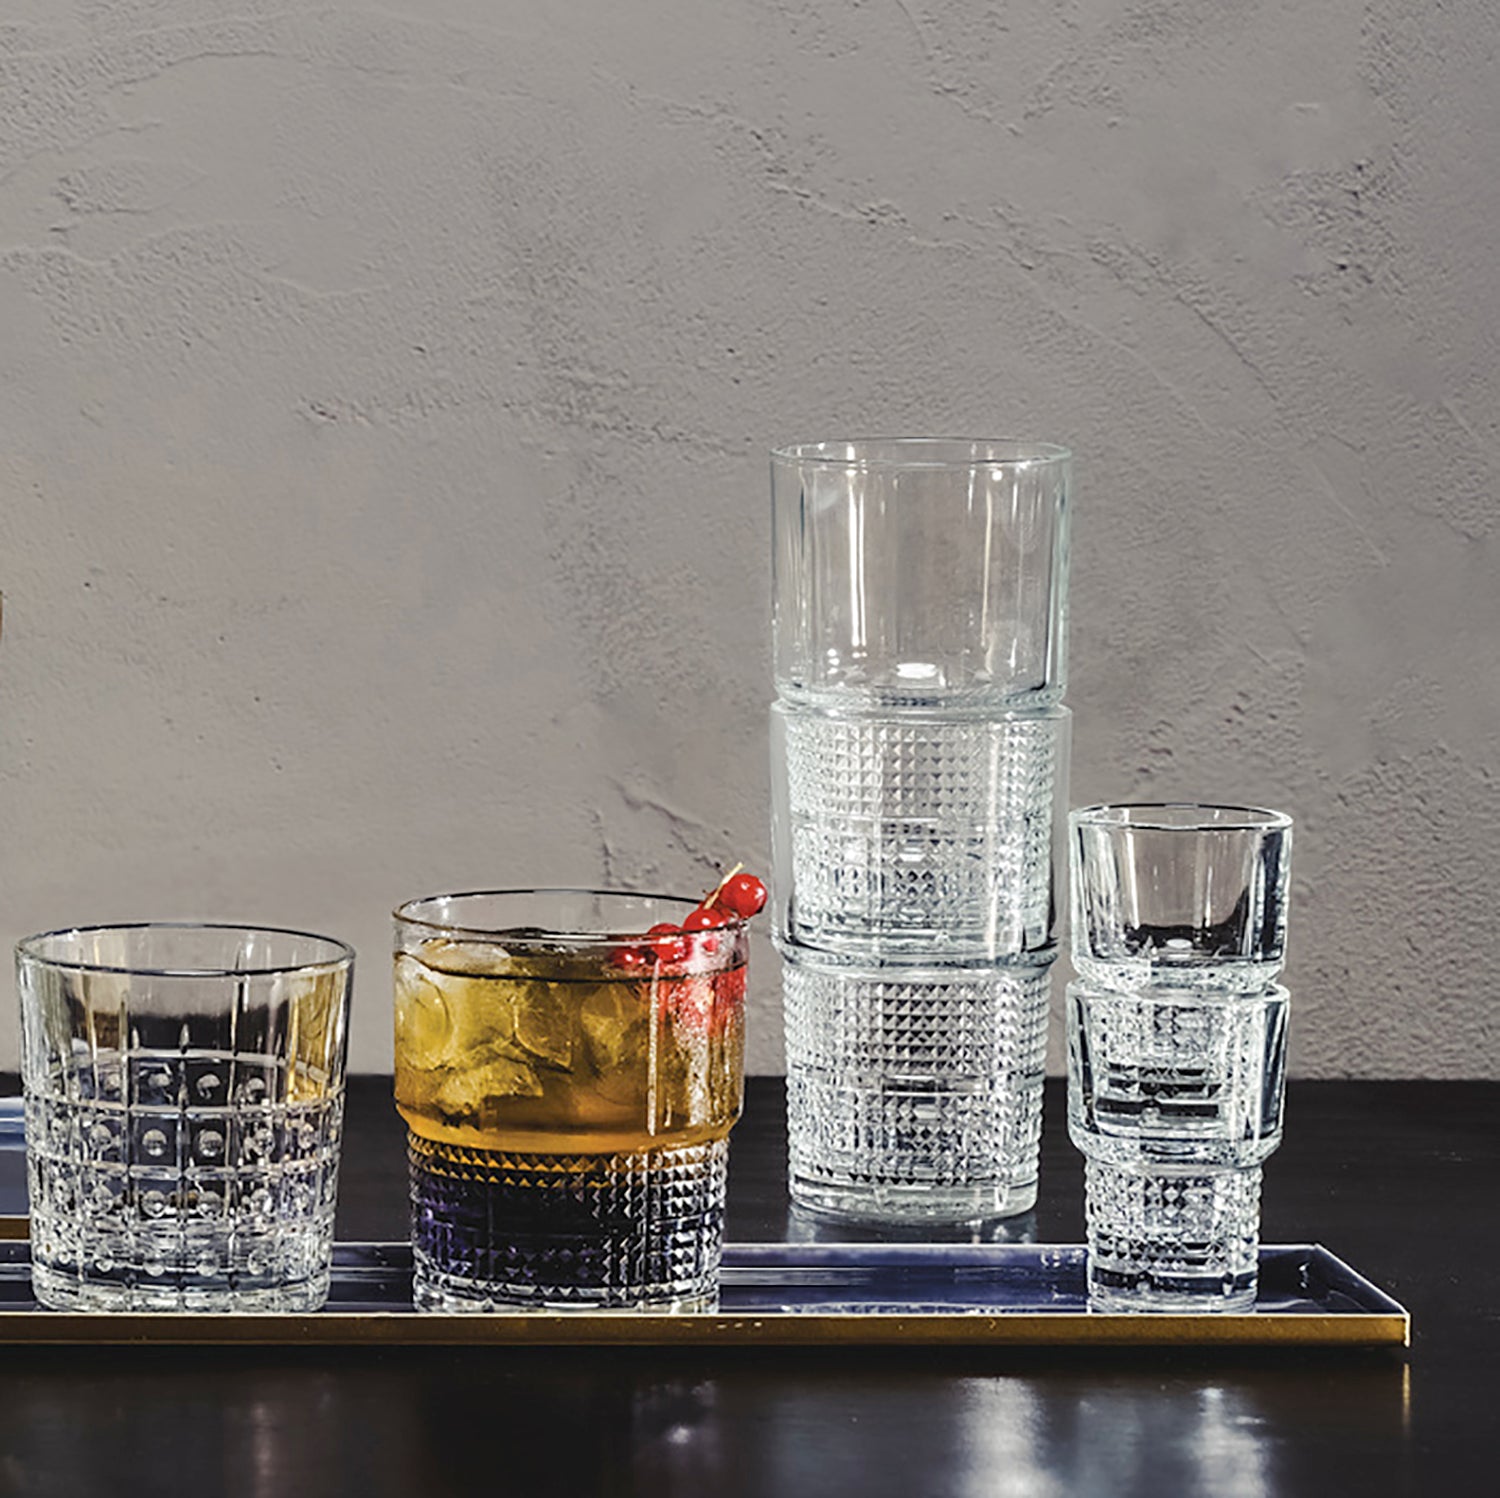 Stackable Drinking Glasses